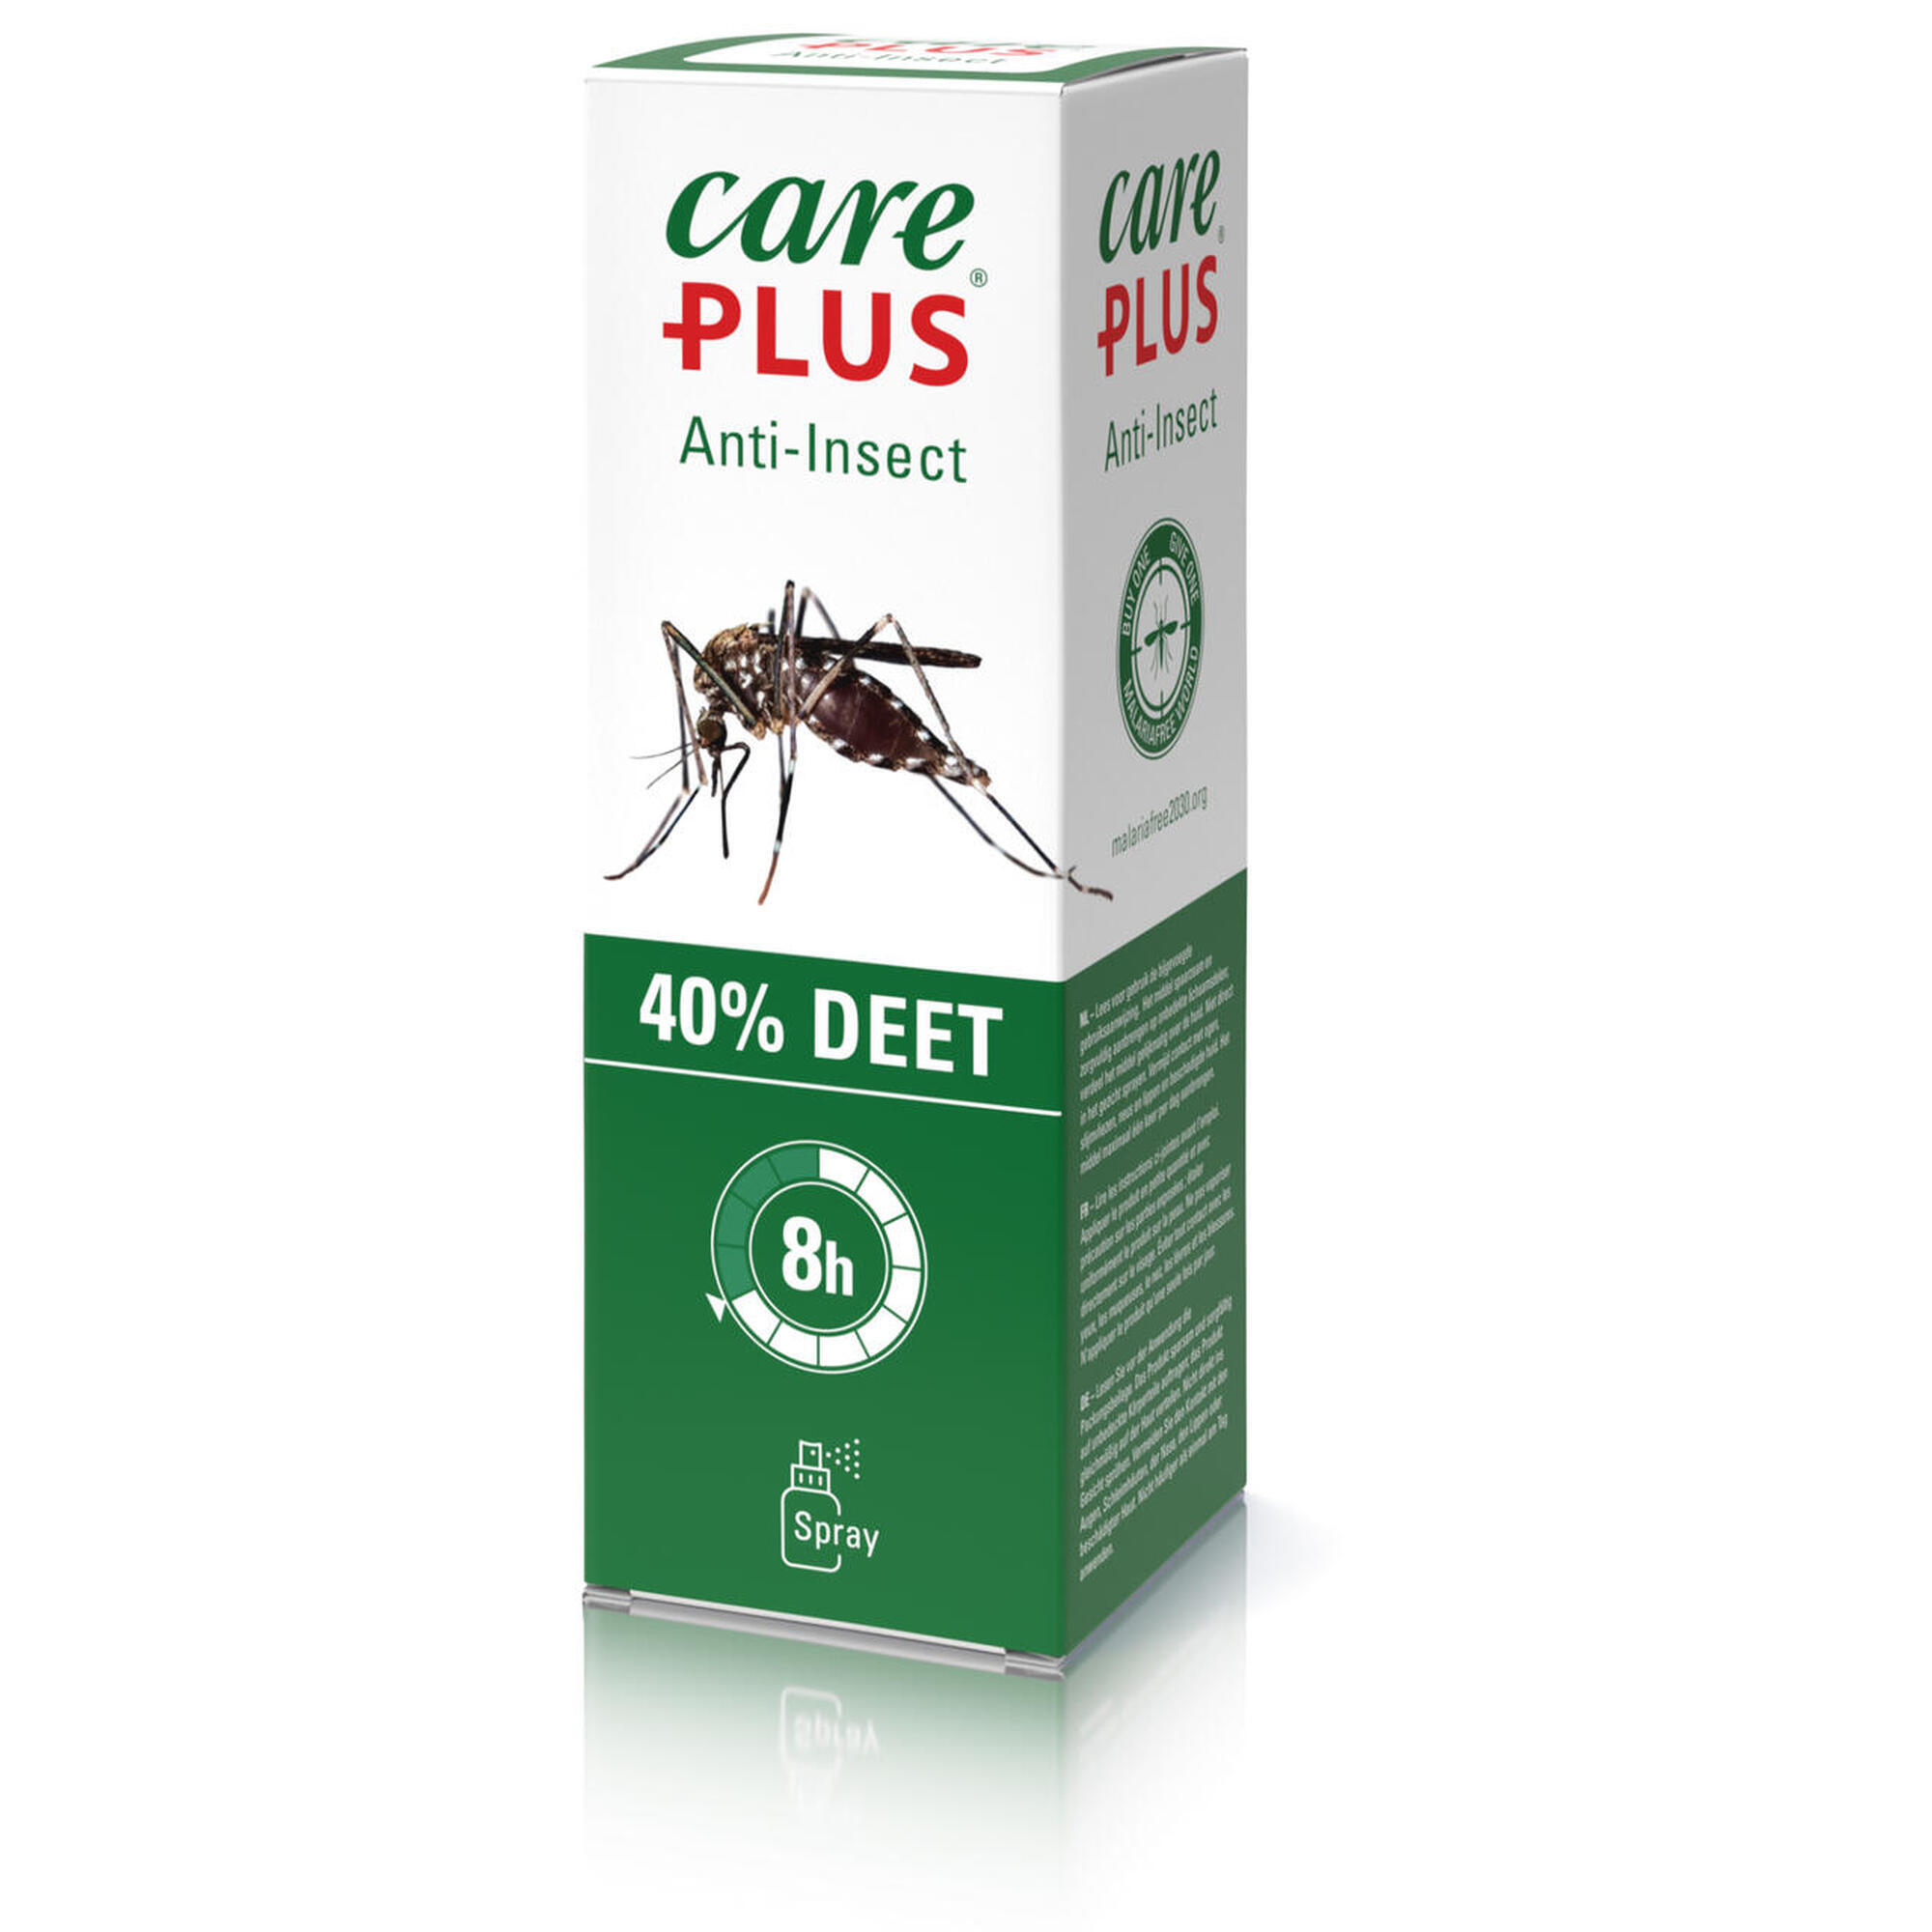 Care Plus Anti-Insect Deet 40% spray 100 ml